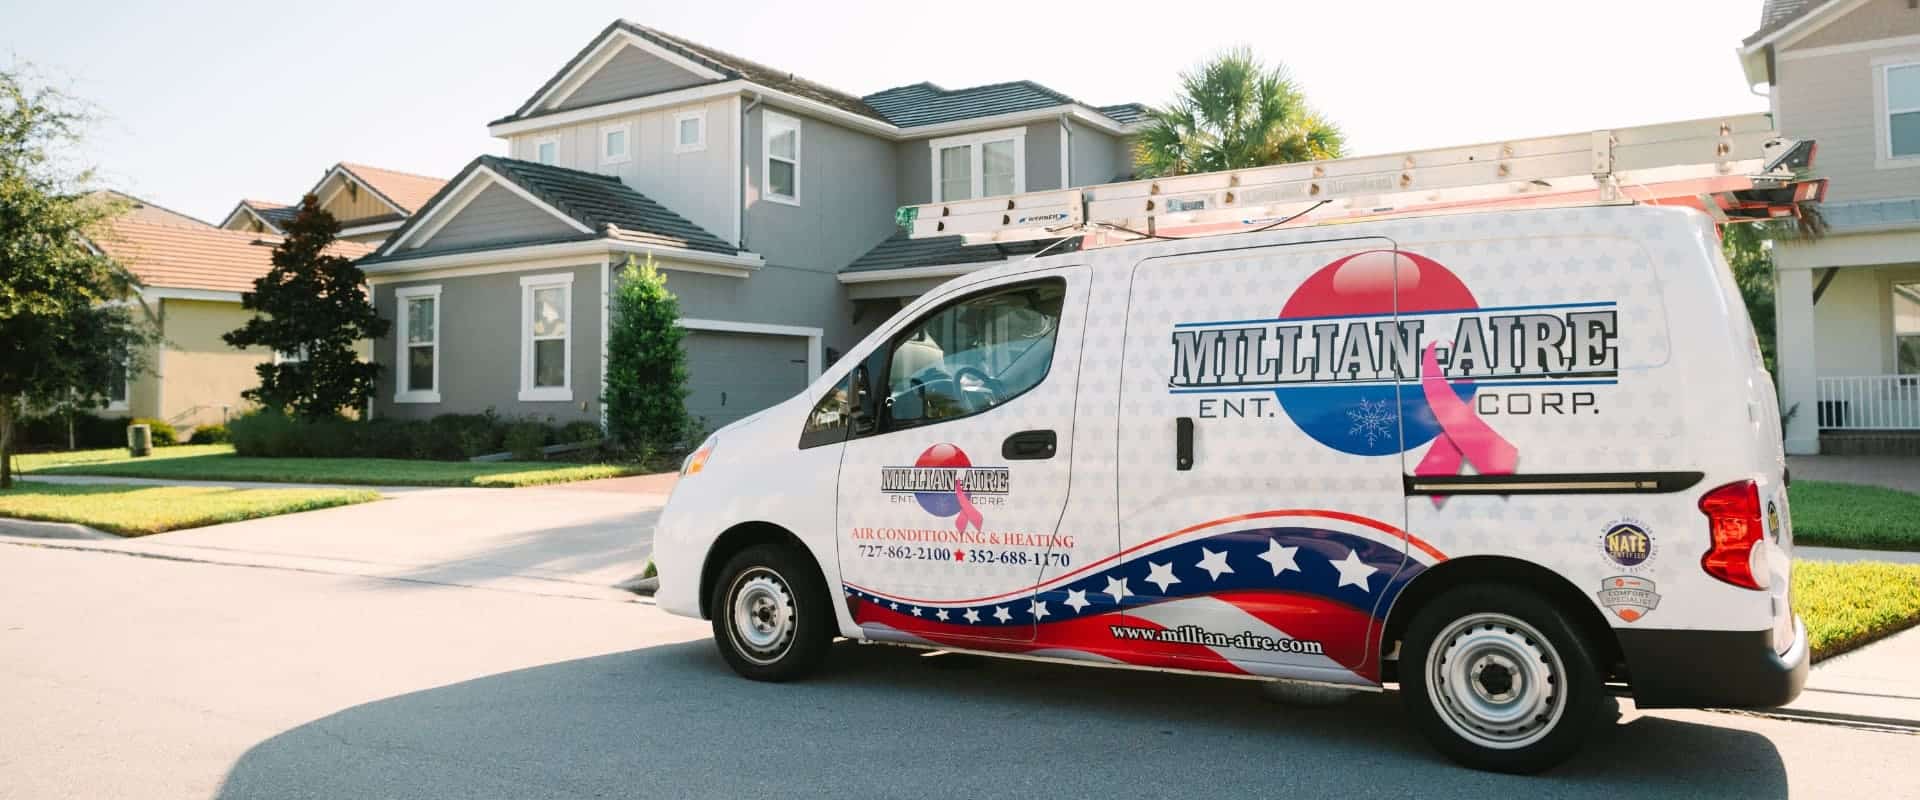 About Millian Aire AC and Heating Services